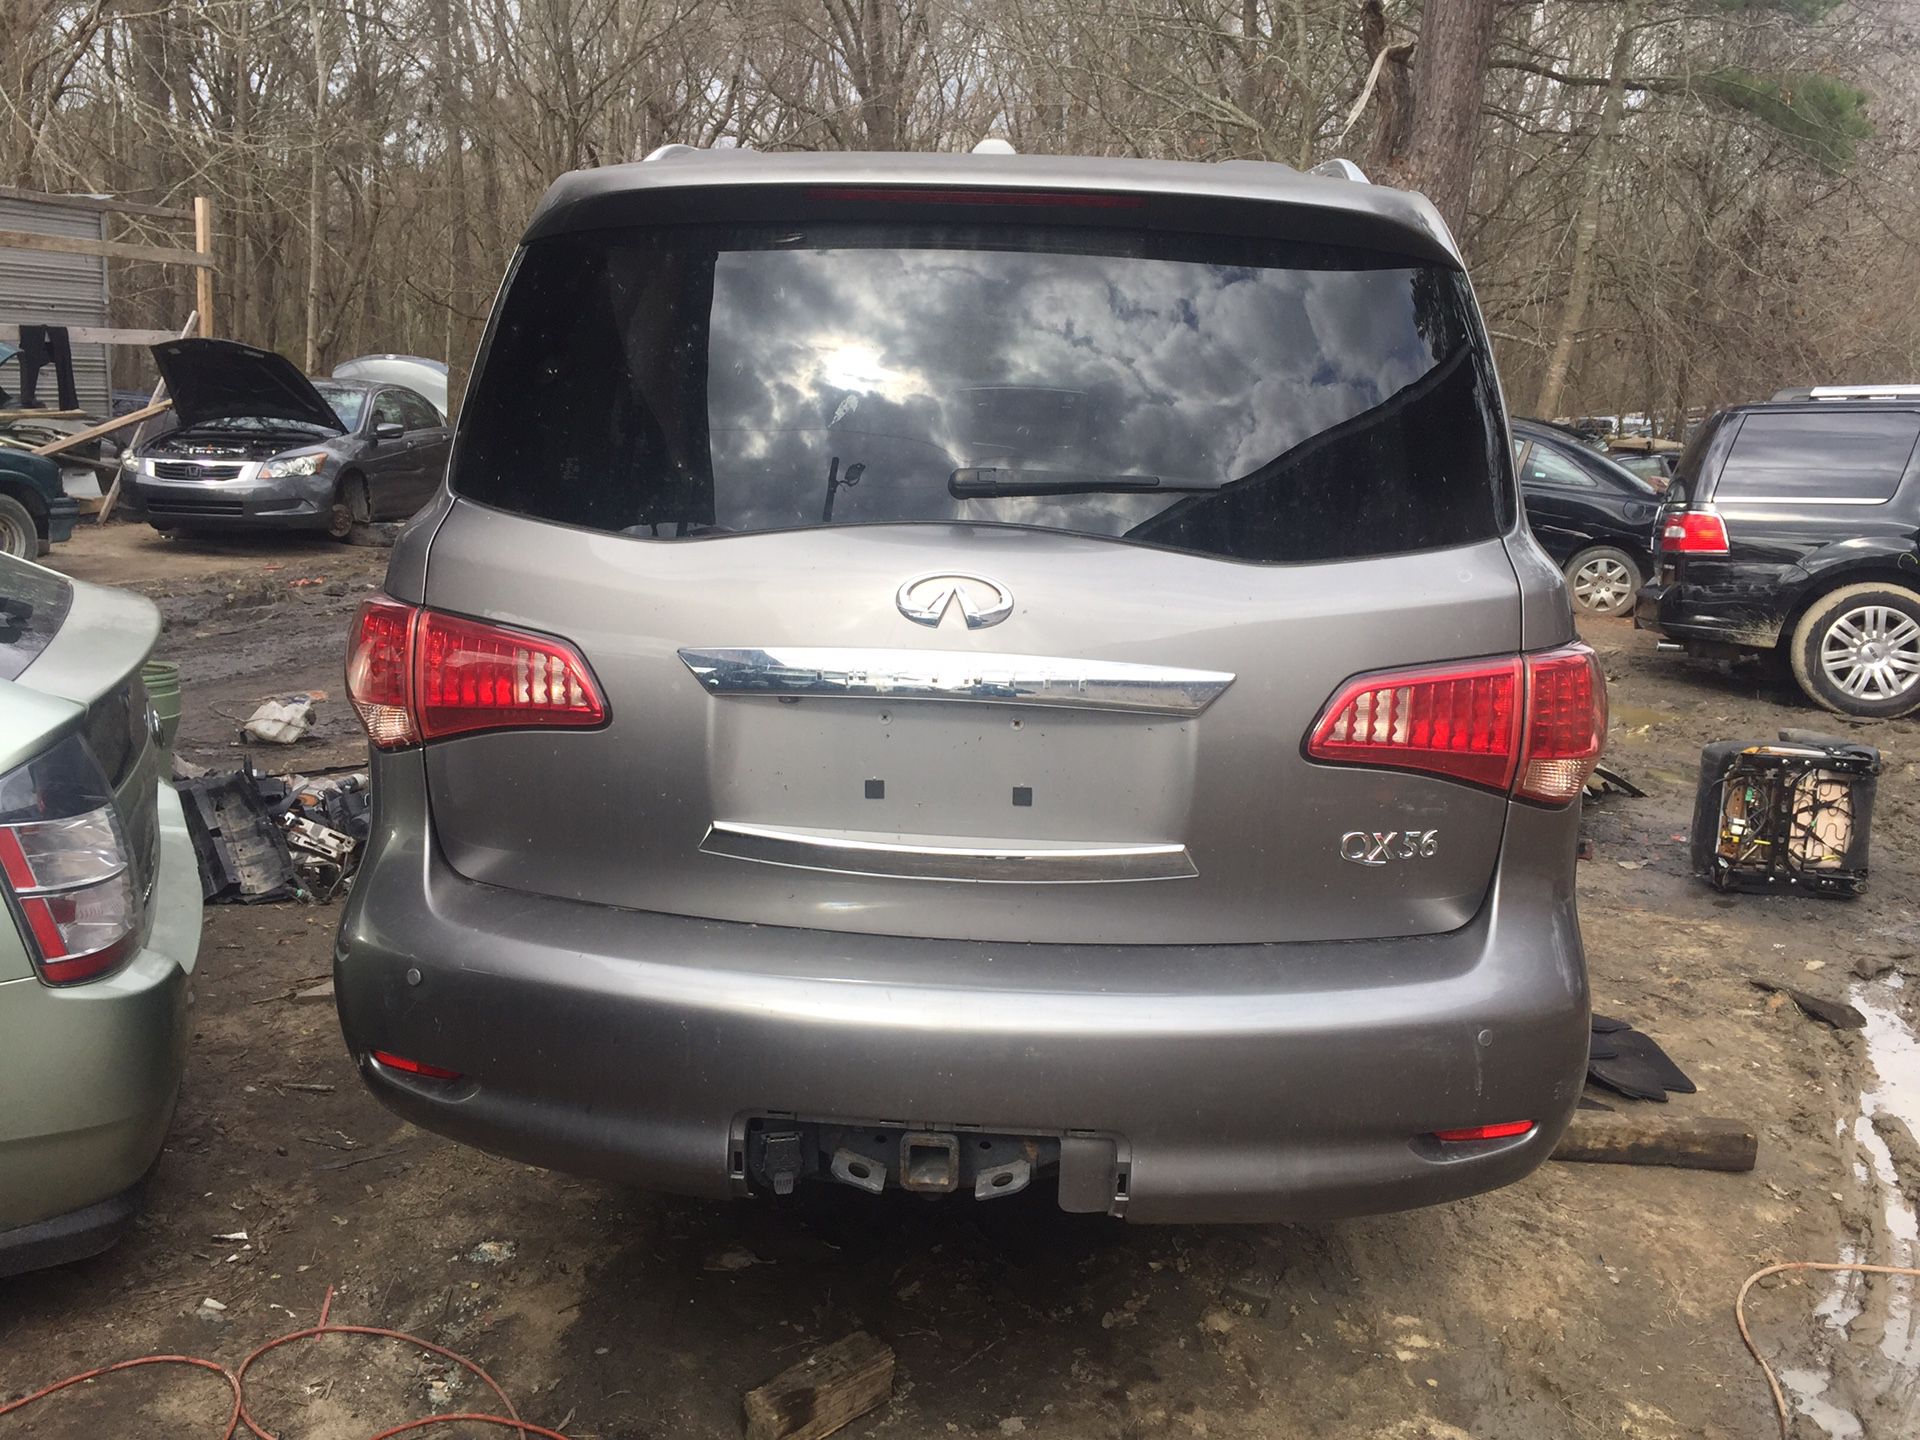 2011 infinity QX56 (parts only)